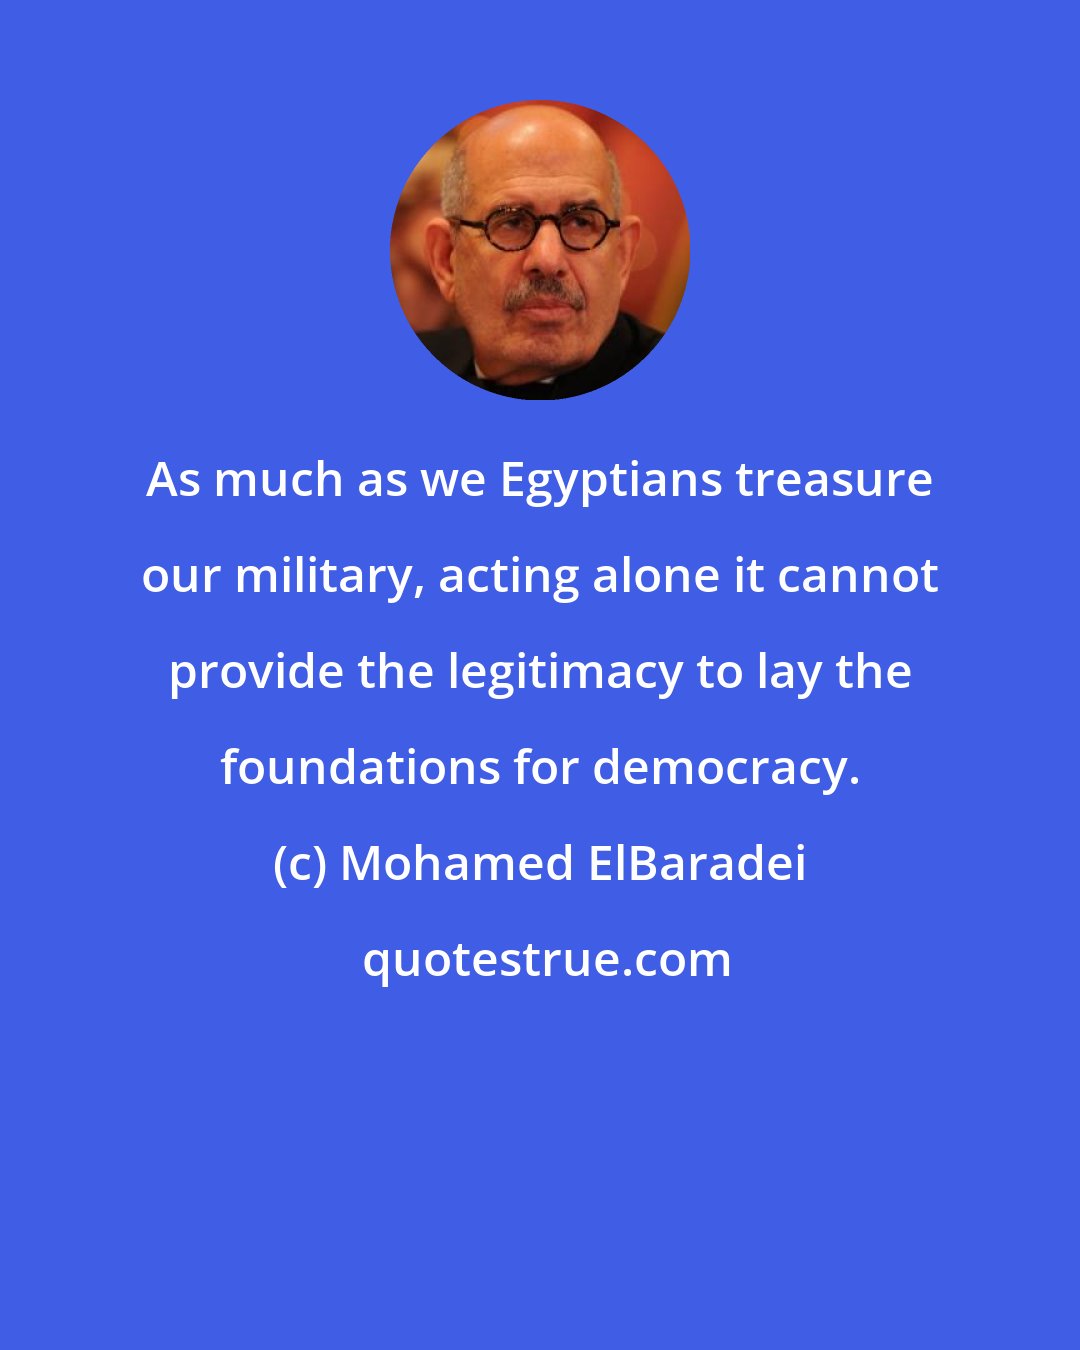 Mohamed ElBaradei: As much as we Egyptians treasure our military, acting alone it cannot provide the legitimacy to lay the foundations for democracy.